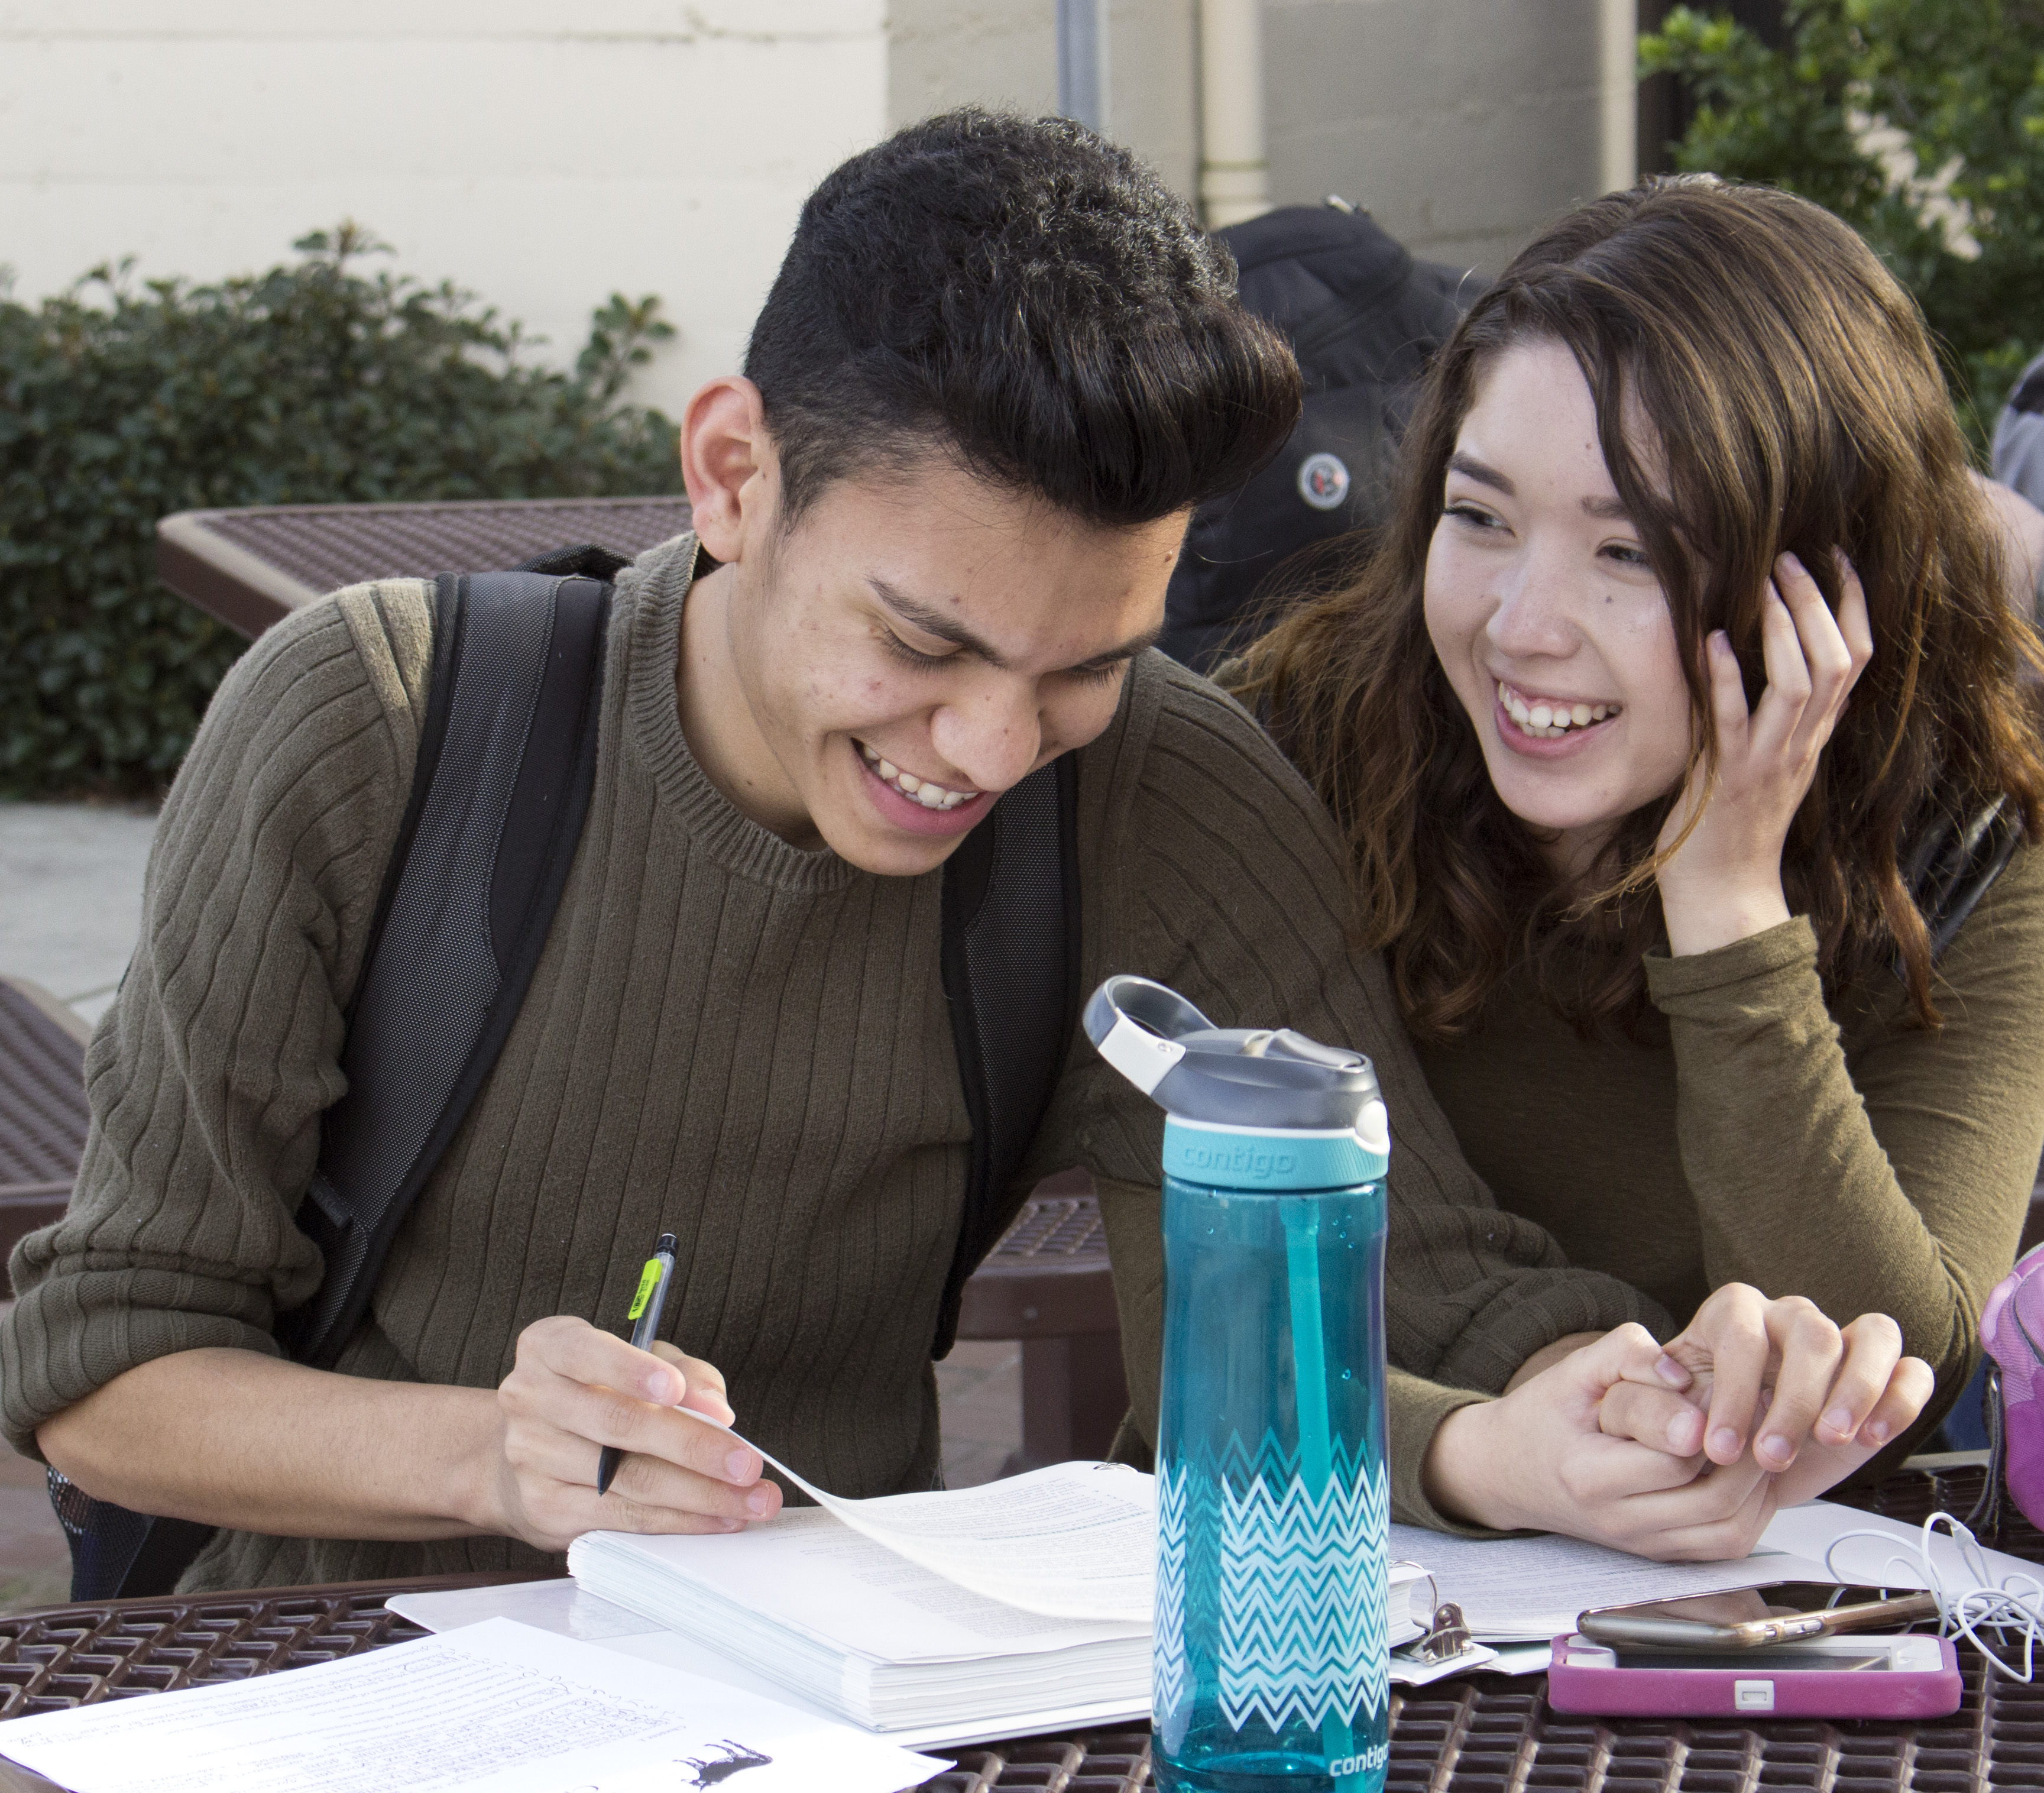 City College couple Aleksei de Santiago, political science major, (left) and Jasmine Valdez-Patino, criminal justice major, studying for an exam in the quad. Hector Flores, Staff Photographer. | hectorfloresexpress@gmail.com